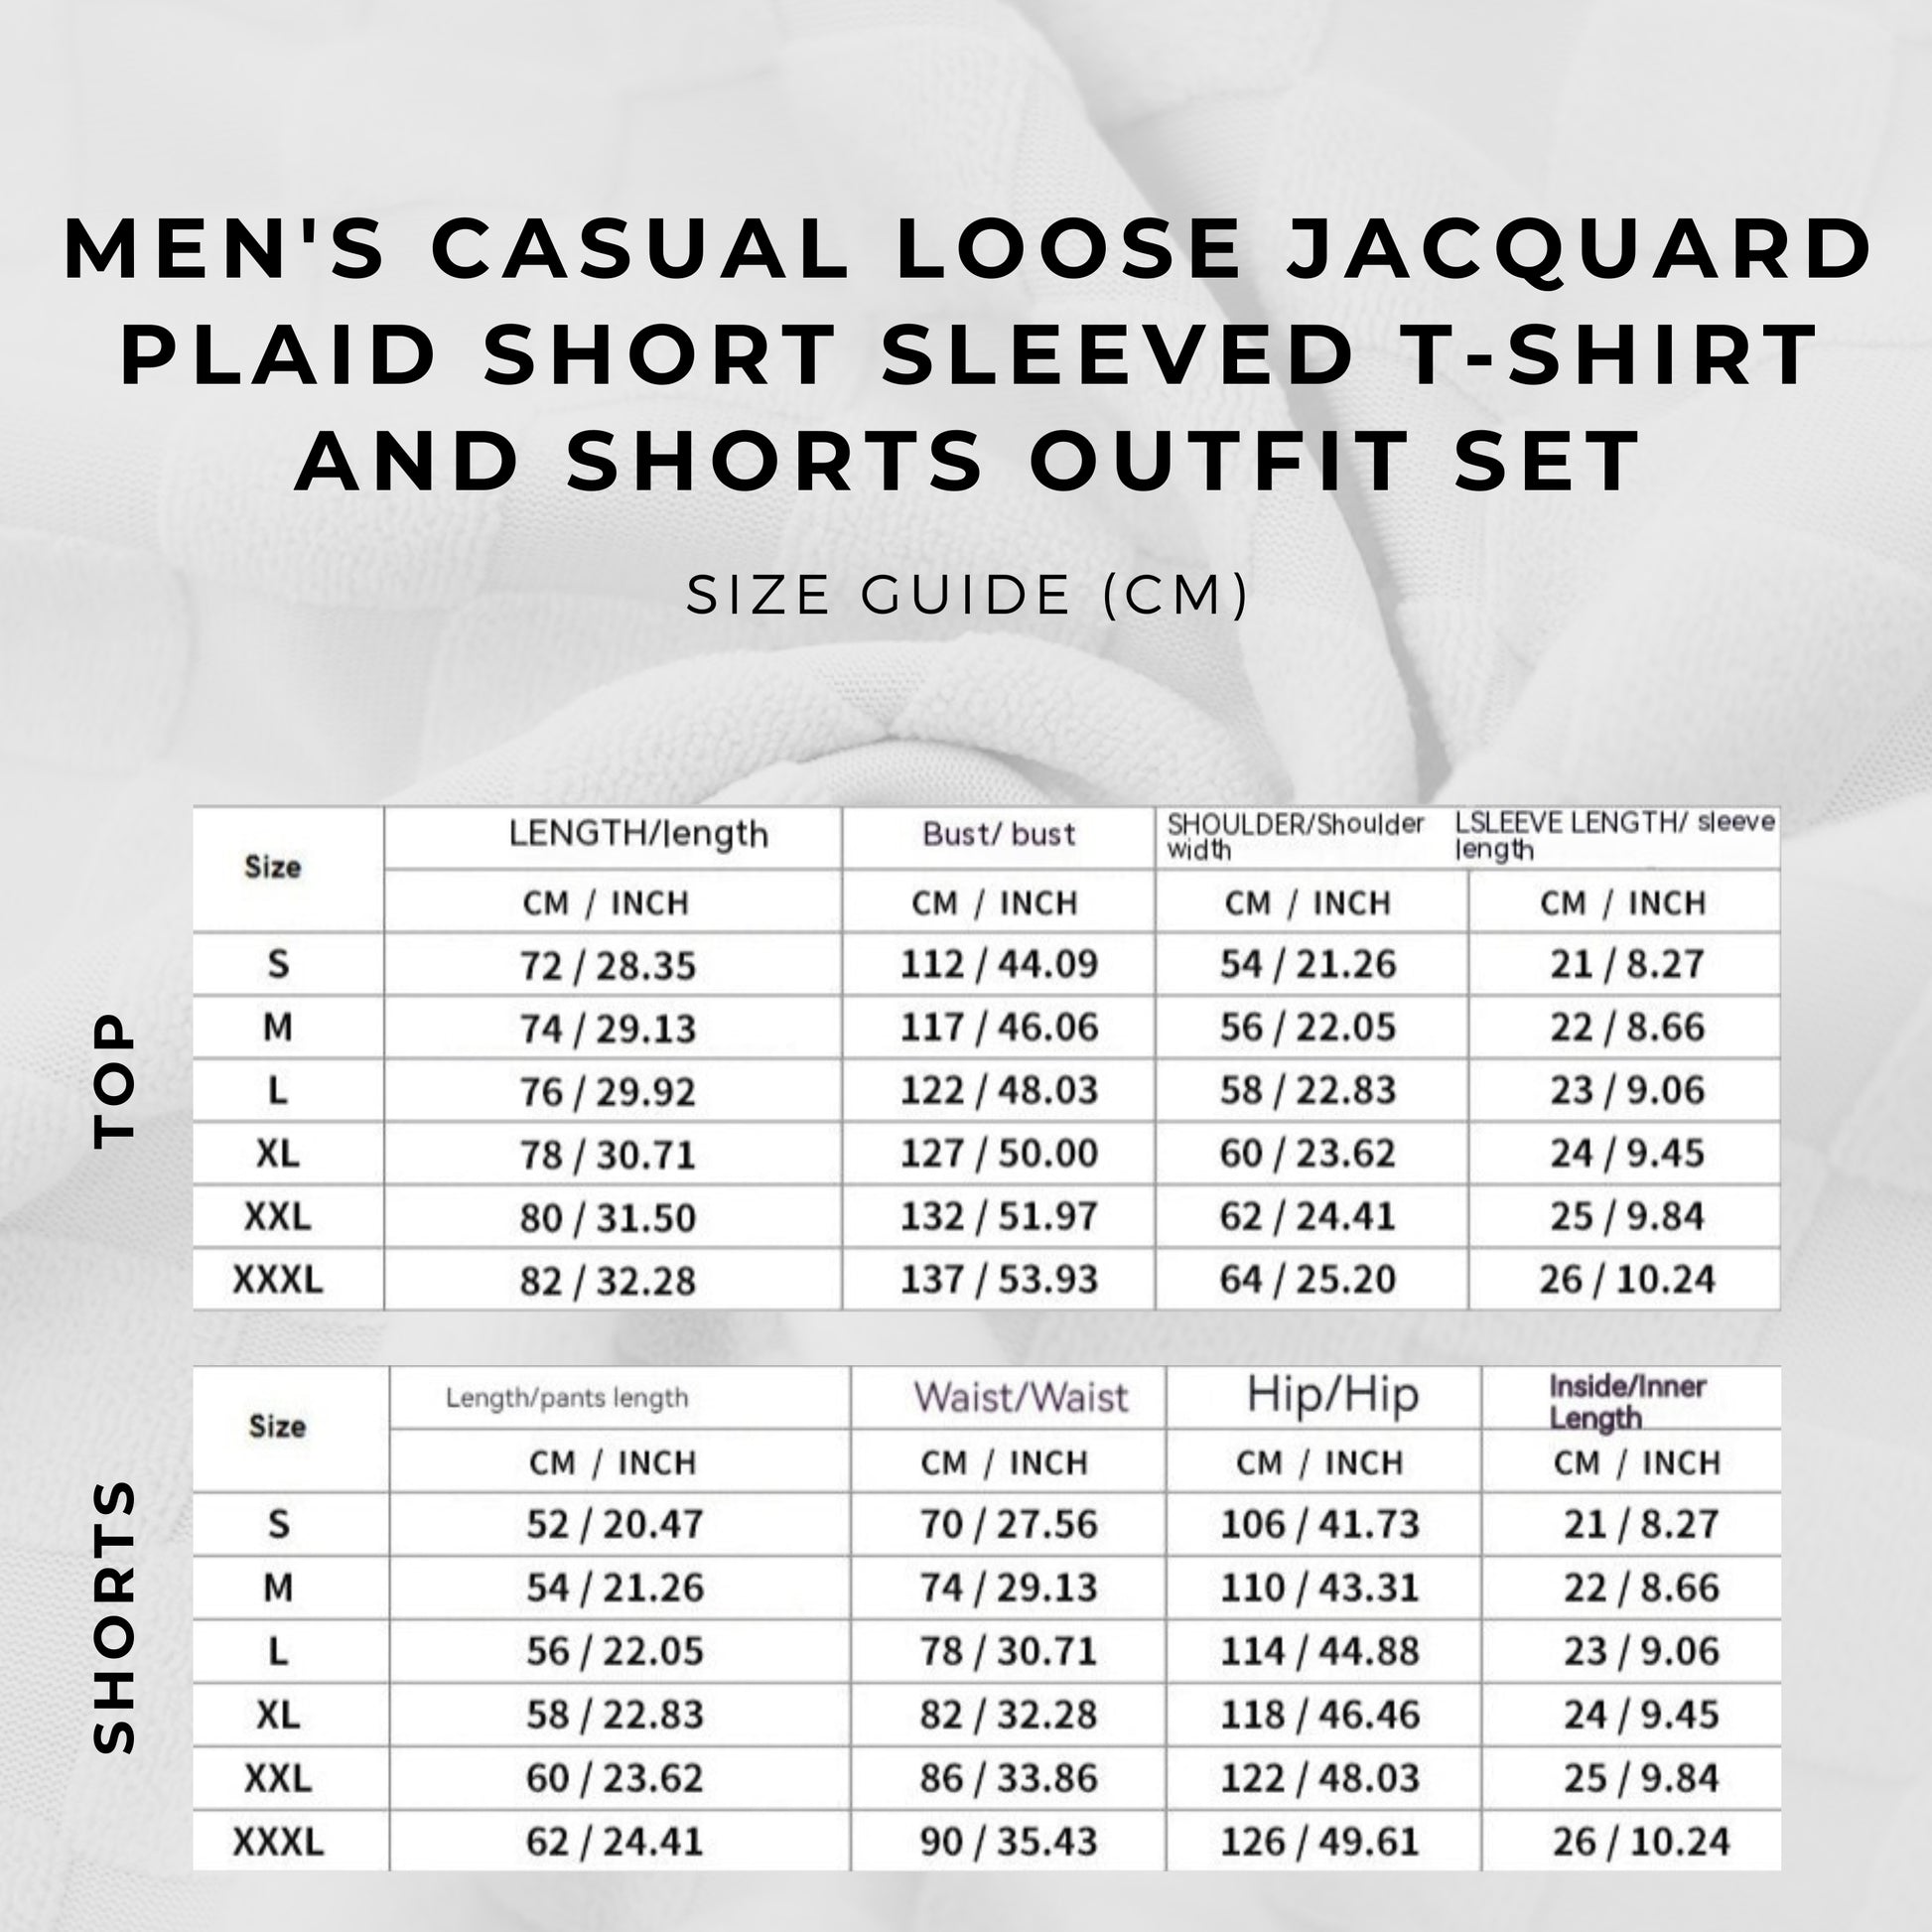 Men's Casual Loose Jacquard Plaid Short Sleeved T-Shirt and Shorts Outfit Set size